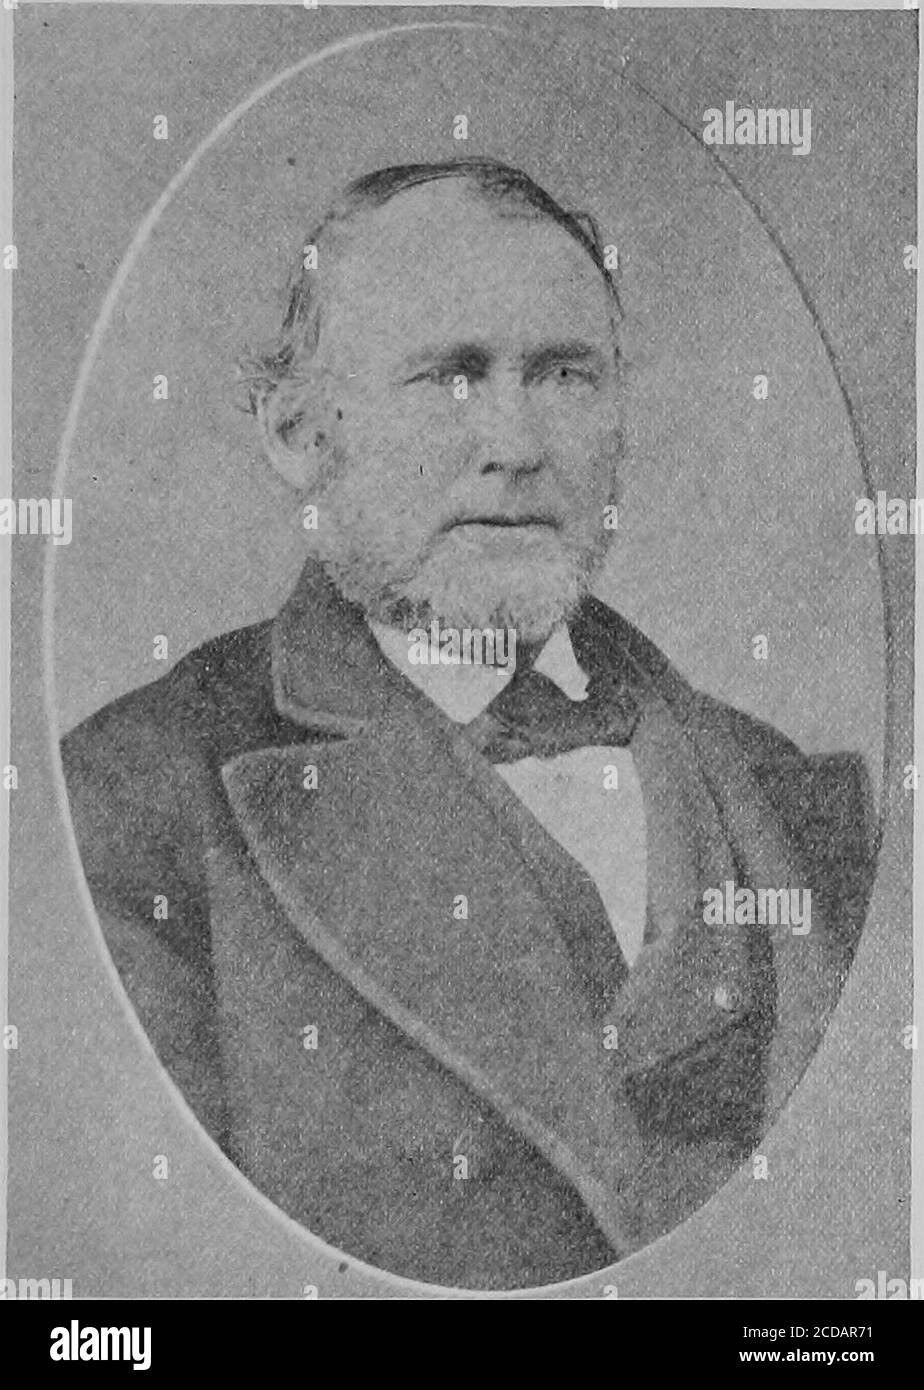 . The history of Penacook, N.H., from its first settlement in 1734 up to 1900 . actising attorney at Manchester, N. H.,represented ward one in the Concord board of aldermen someyears ago. His widow still lives (1901) in the homestead near Woodlawncemetery. EDWARD TAYLOR. [CONTRIBUTED BY HON. J. C. LINEHAN.] Edward Taylor came to Penacook in 1852. He was born inRosscommon, Ireland. While in life he was one of the bestknown men in Penacook, and accumulated considerable property.He died before 1890, and left one son and two daughters. Hisson died before 1900. His widow and children reside in theb Stock Photo